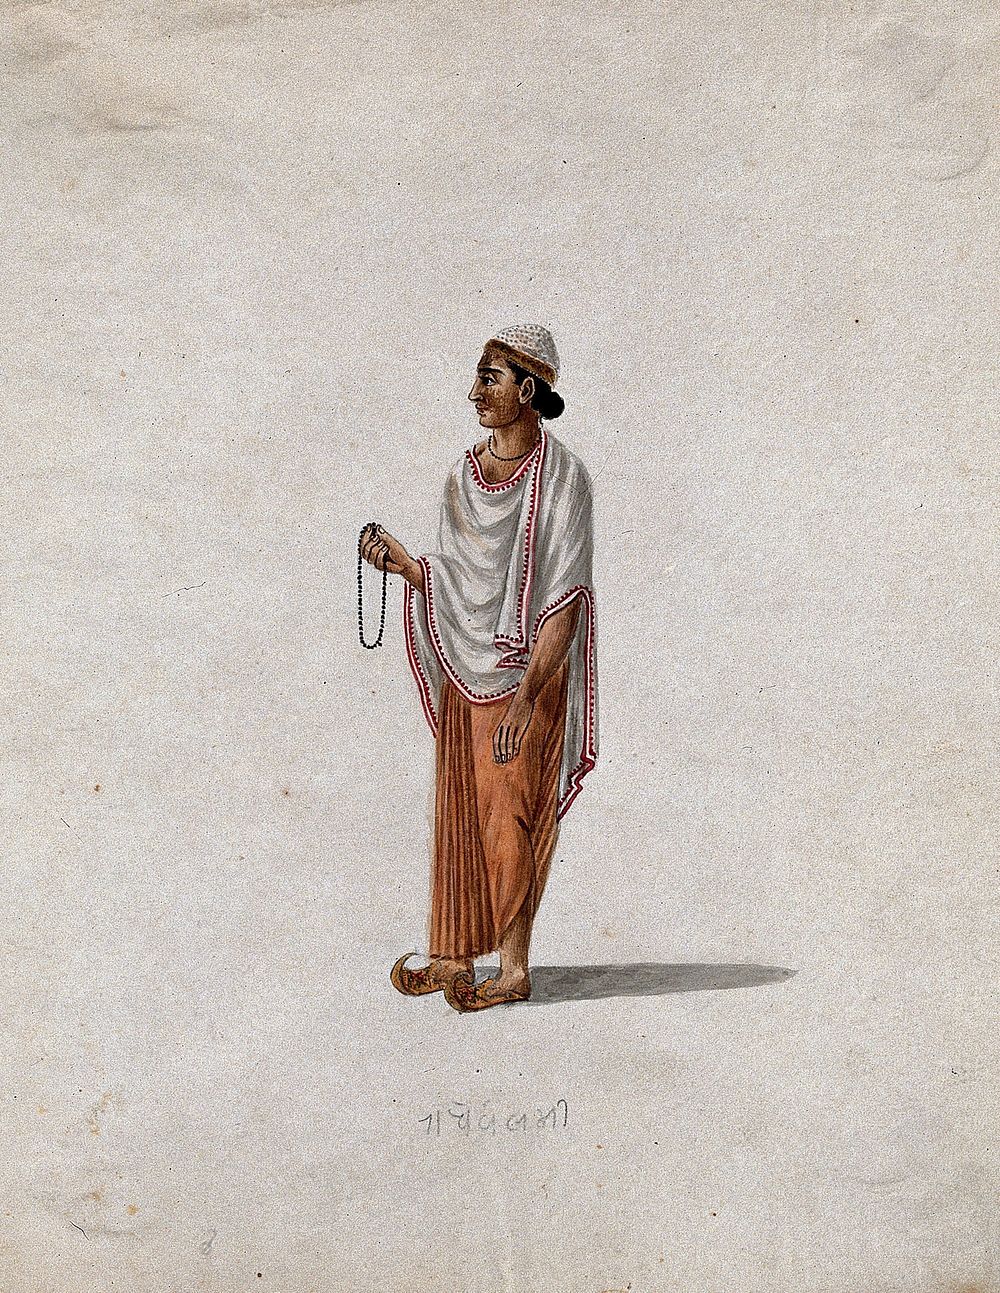 A Muslim priest holding prayer beads. Gouache painting by an Indian artist.